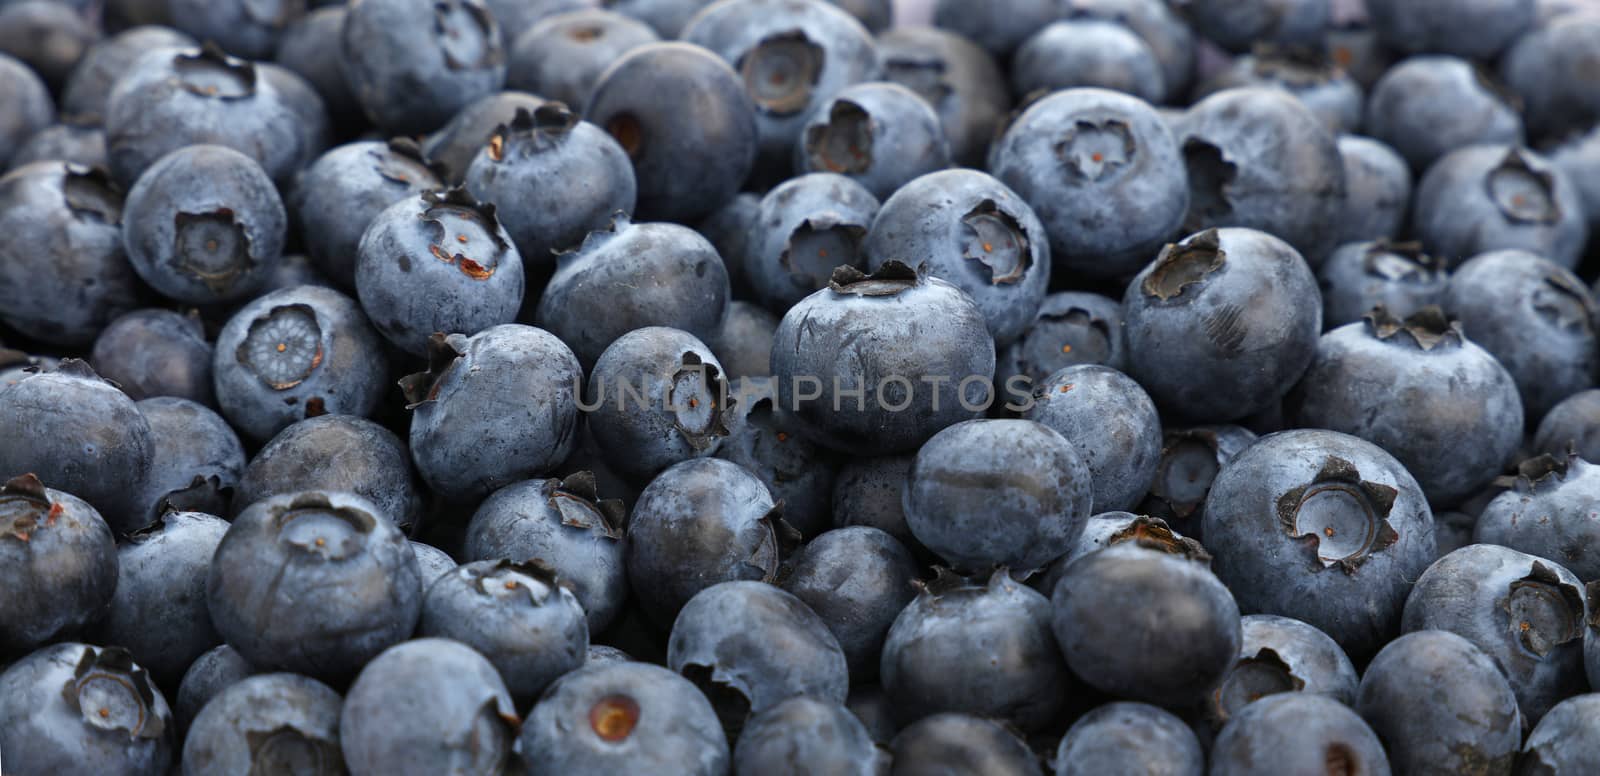 Background of fresh blueberry close up by BreakingTheWalls